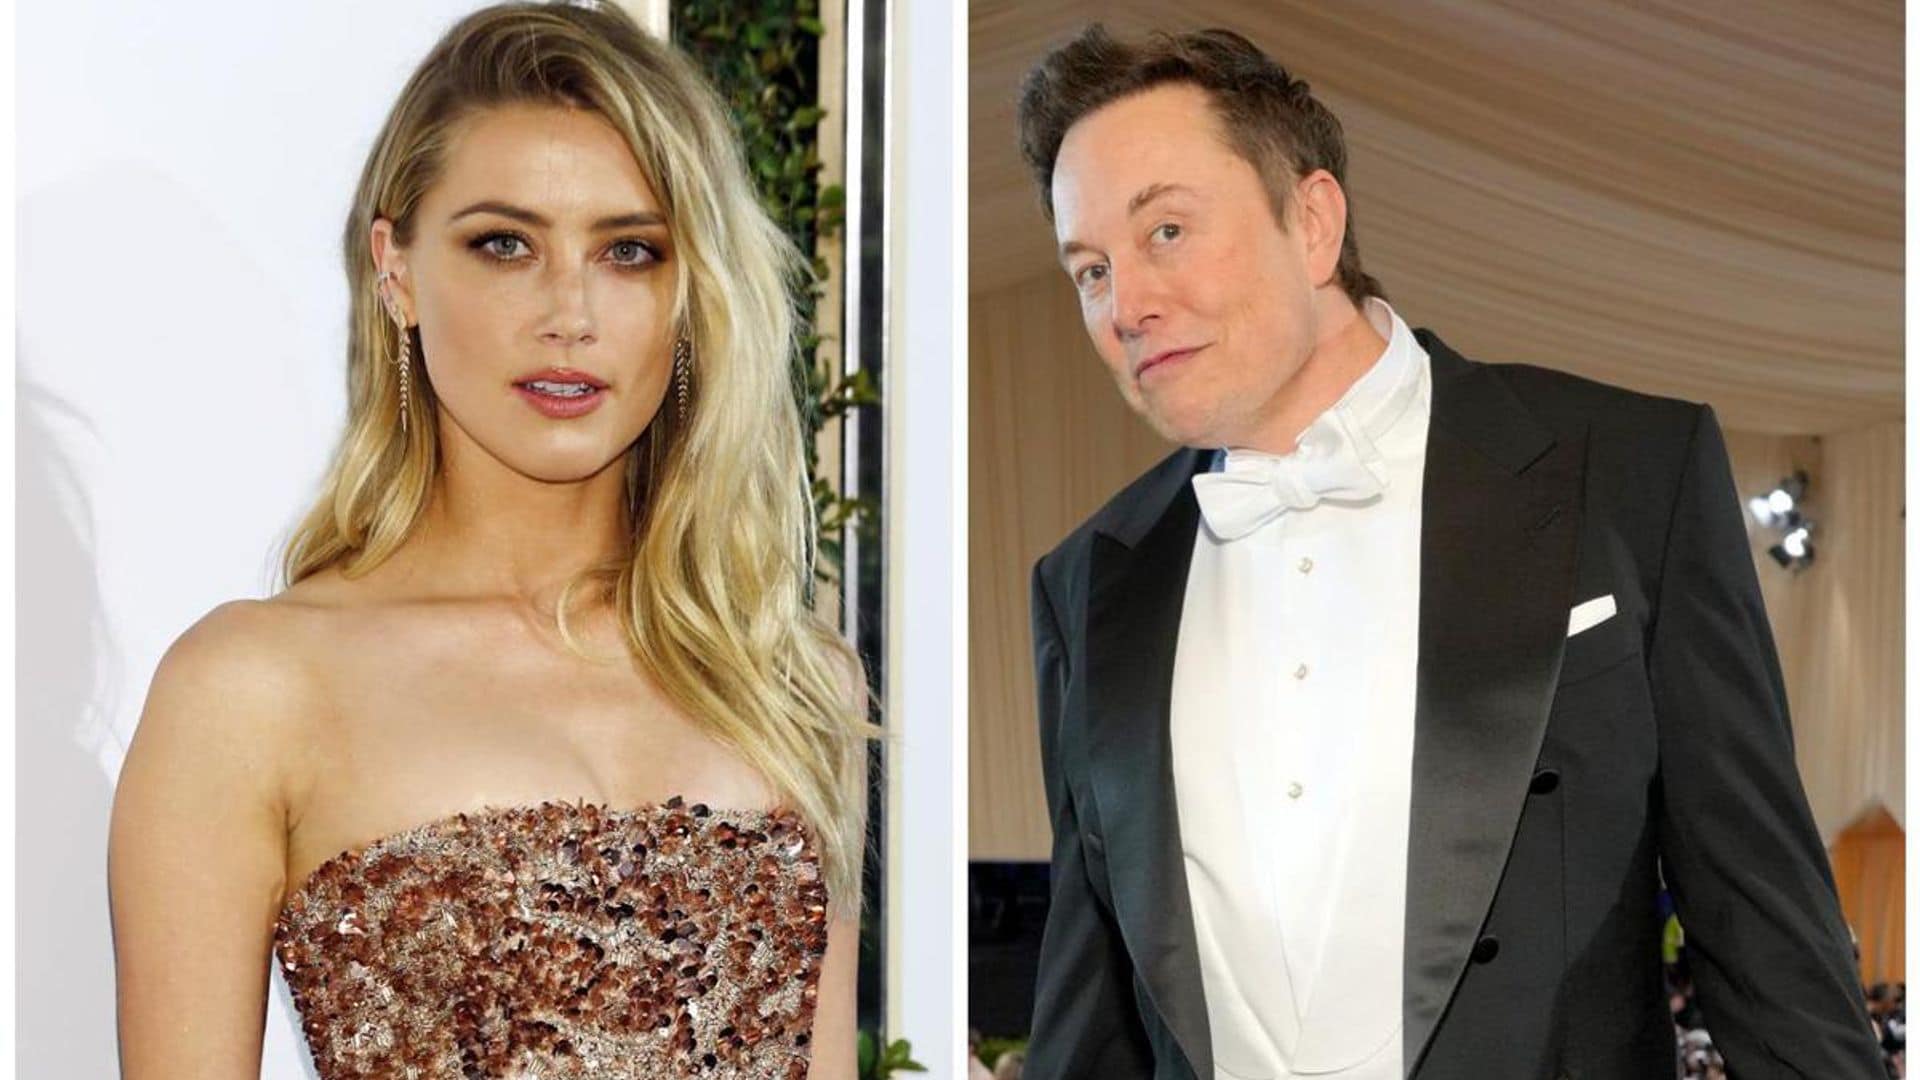 Elon Musk shares photo of his ex Amber Heard in cosplay